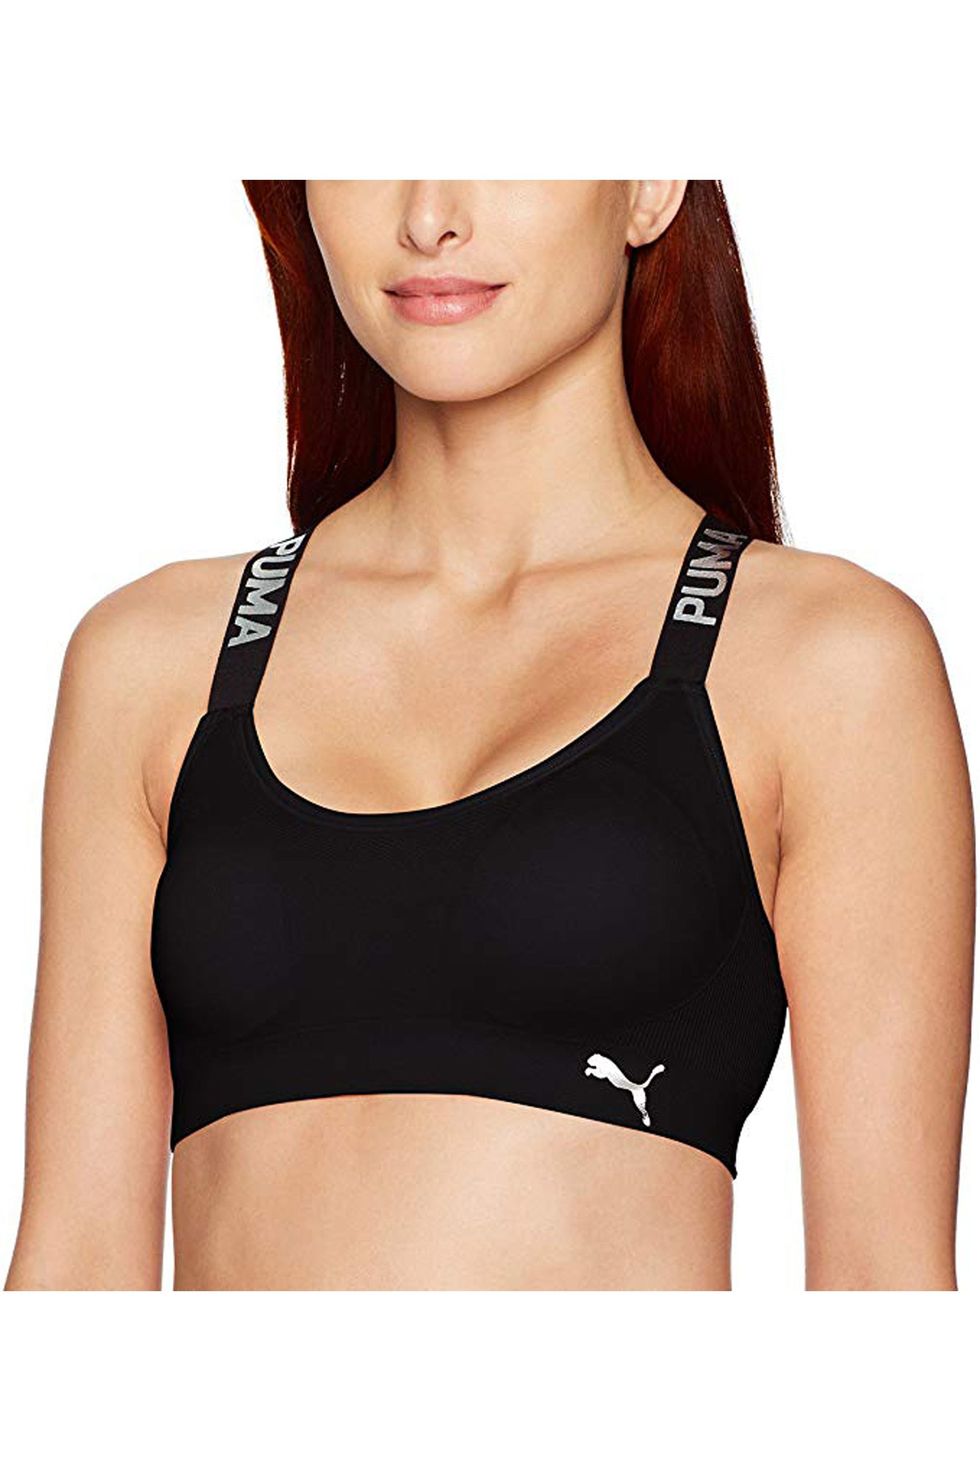 OUTDOOR VOICES Doing Things Sports Bra Black Blue Sz XS Mesh